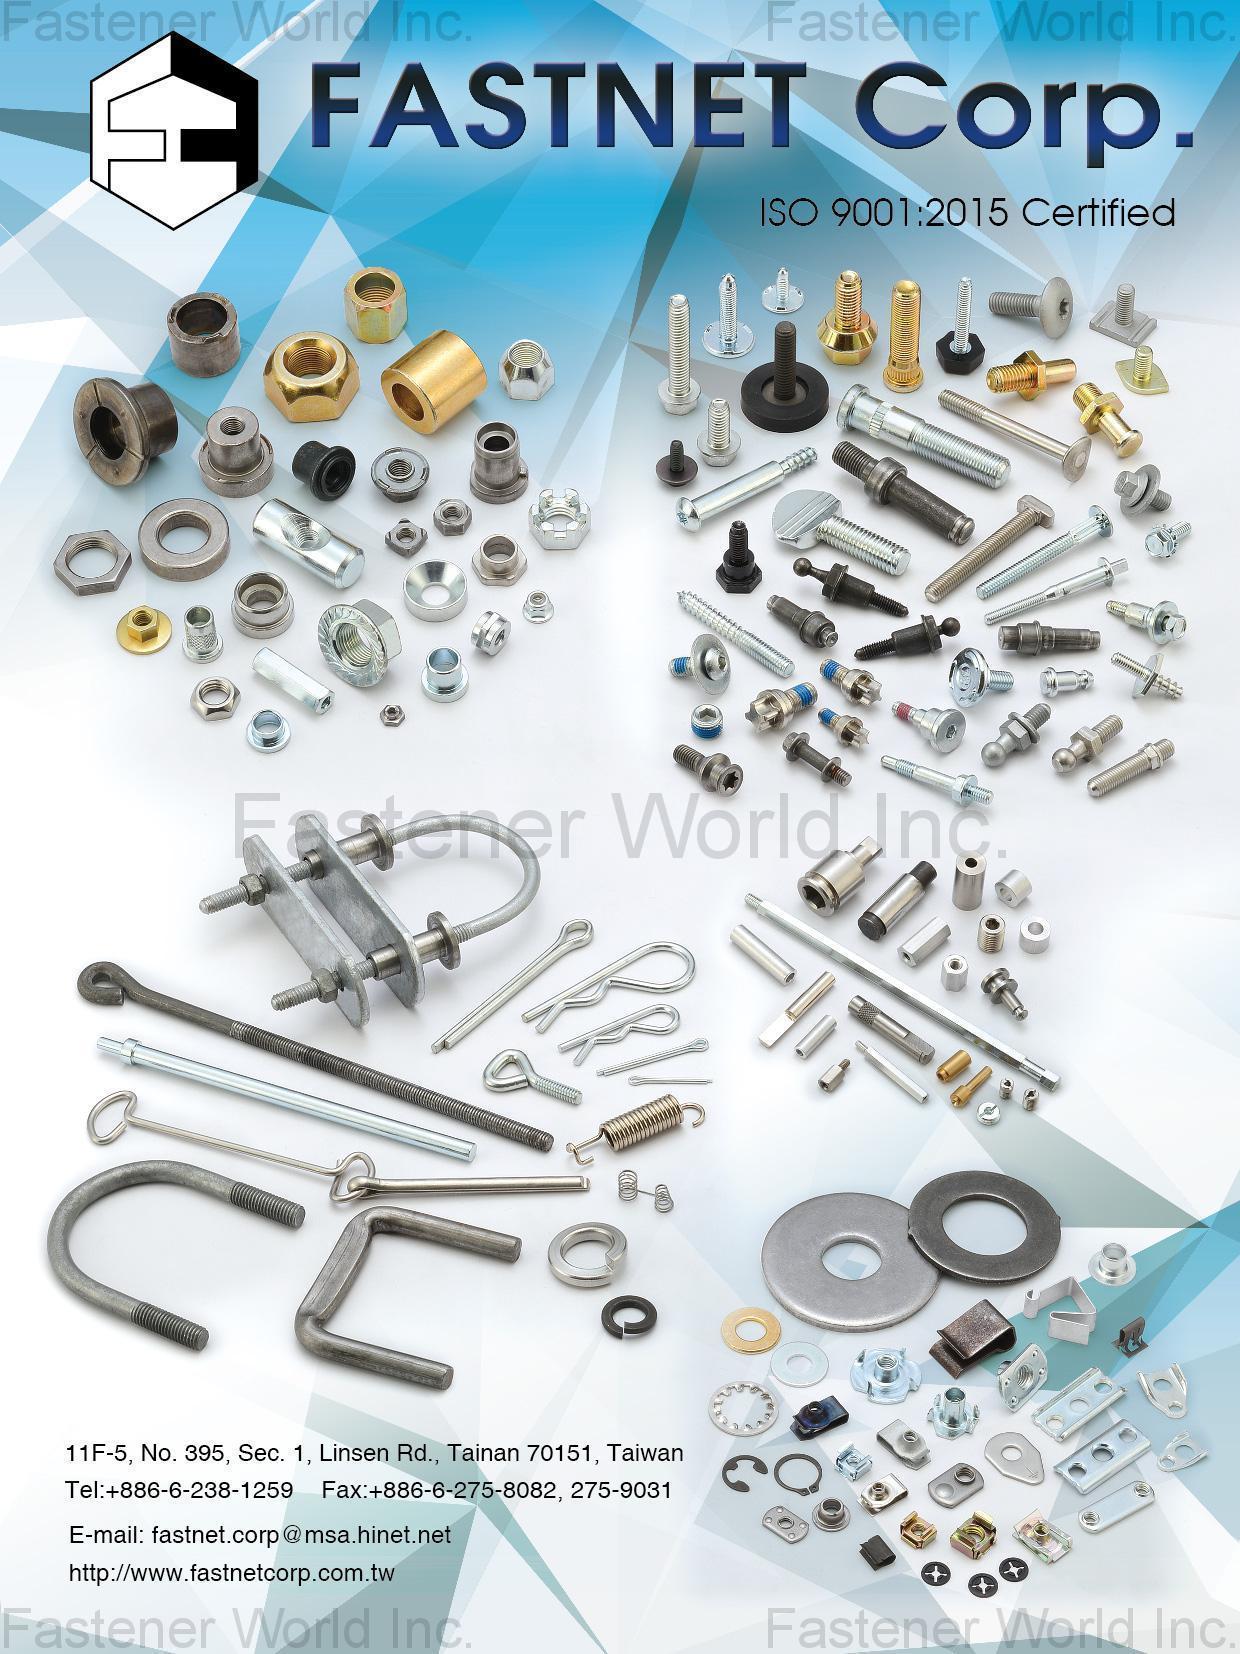 FASTNET CORP.  , Clinch Stud, Double End Stud, Flange Screw, Hex Socket Set Screw, Self drilling Screws, Sems, Special Screws to Drawings, Tapping Machine Screws, T-bolt, Thread Forming Screws, Thumb SCREW, Weld Screw, Wheel Bolt, Ball stud, Hanger Bolt, Conical Washer Nut, Flange Nut, Rivet Nut, Spacer, Special Nut, Weld Nut, Wheel Nut, Cage Nut, Stamping, T-nut, U Clip Nut, Washer, TAB Weld Nut, Spring, Wire Form, Machined Spacer, Machined Shaft, Machined Stand off, Dowel Pin,Shaft , Forged And Stamped Parts